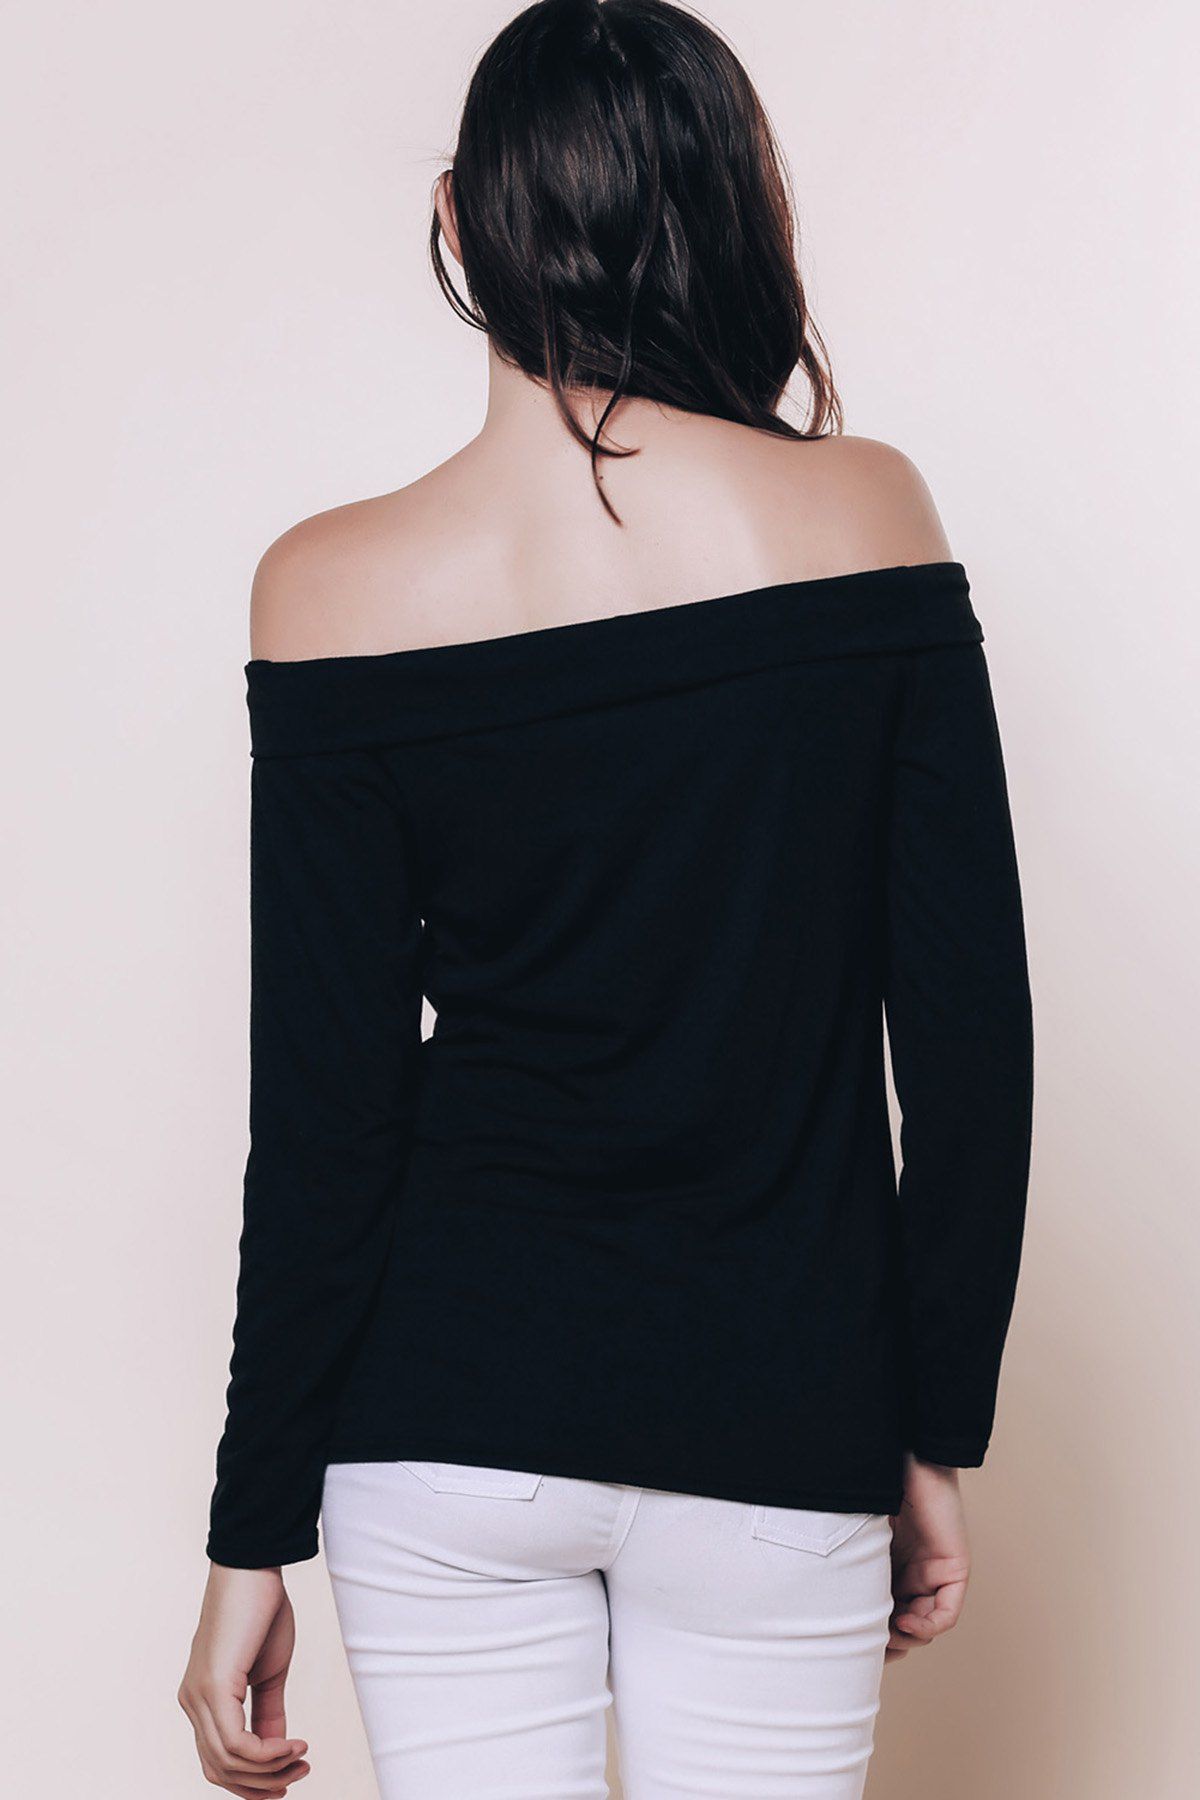 2018 Sexy Black Off The Shoulder Long Sleeve T-Shirt For Women BLACK XL ...